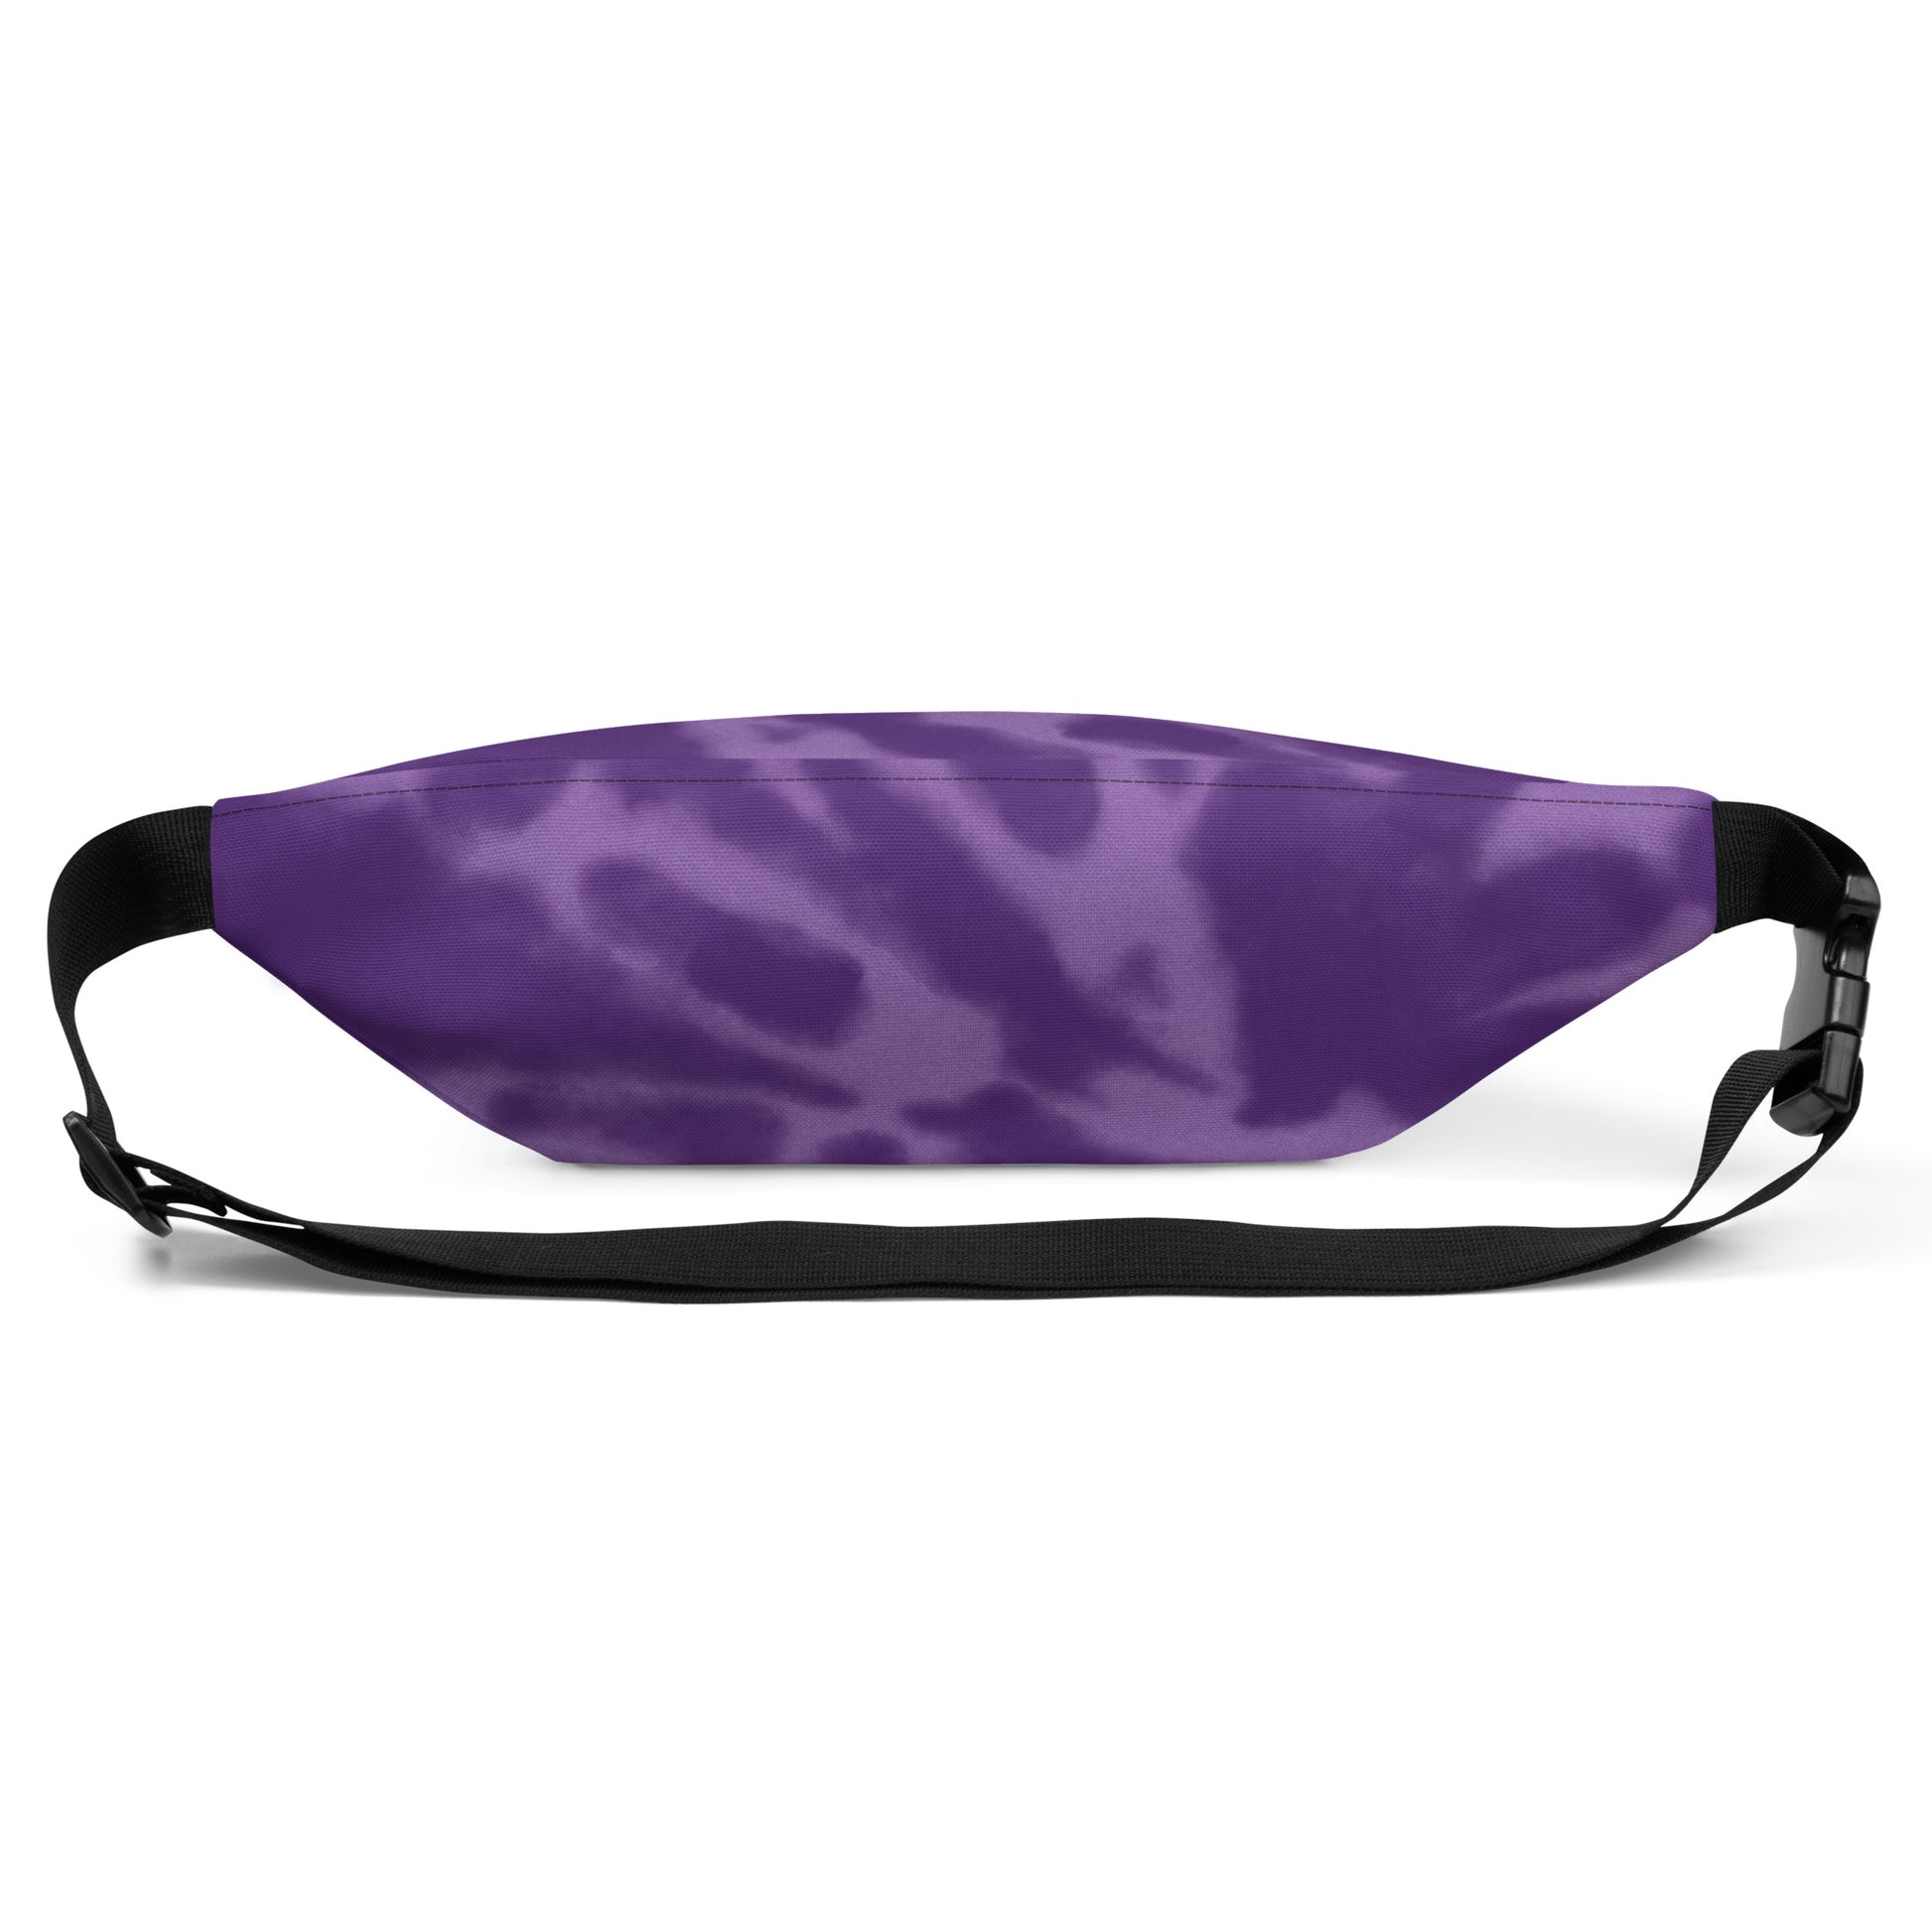 Travel Gift Fanny Pack - Purple Tie-Dye • YQB Quebec City • YHM Designs - Image 09